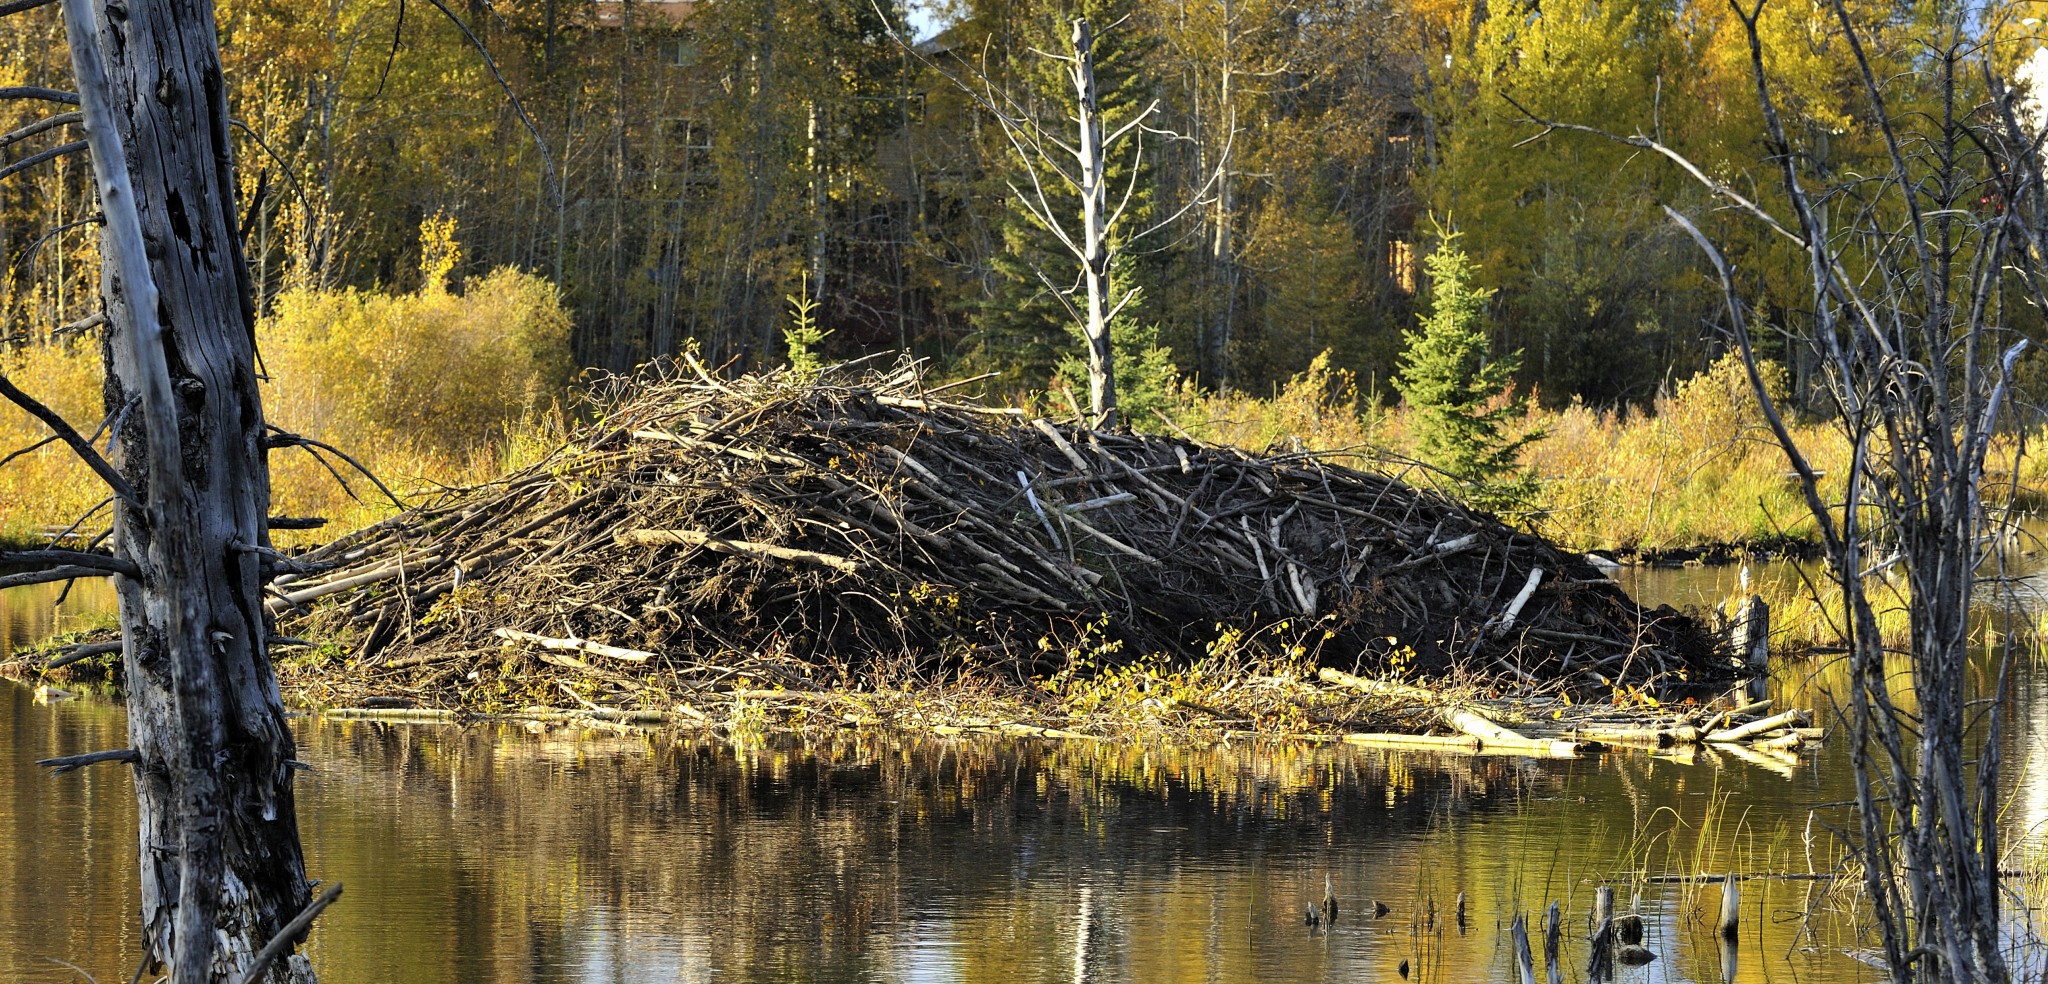 Beavers are ecosystem engineers; and apparently pretty good structural engineers, too. Photo by Robert McGouey/All Canada Photos/Corbis